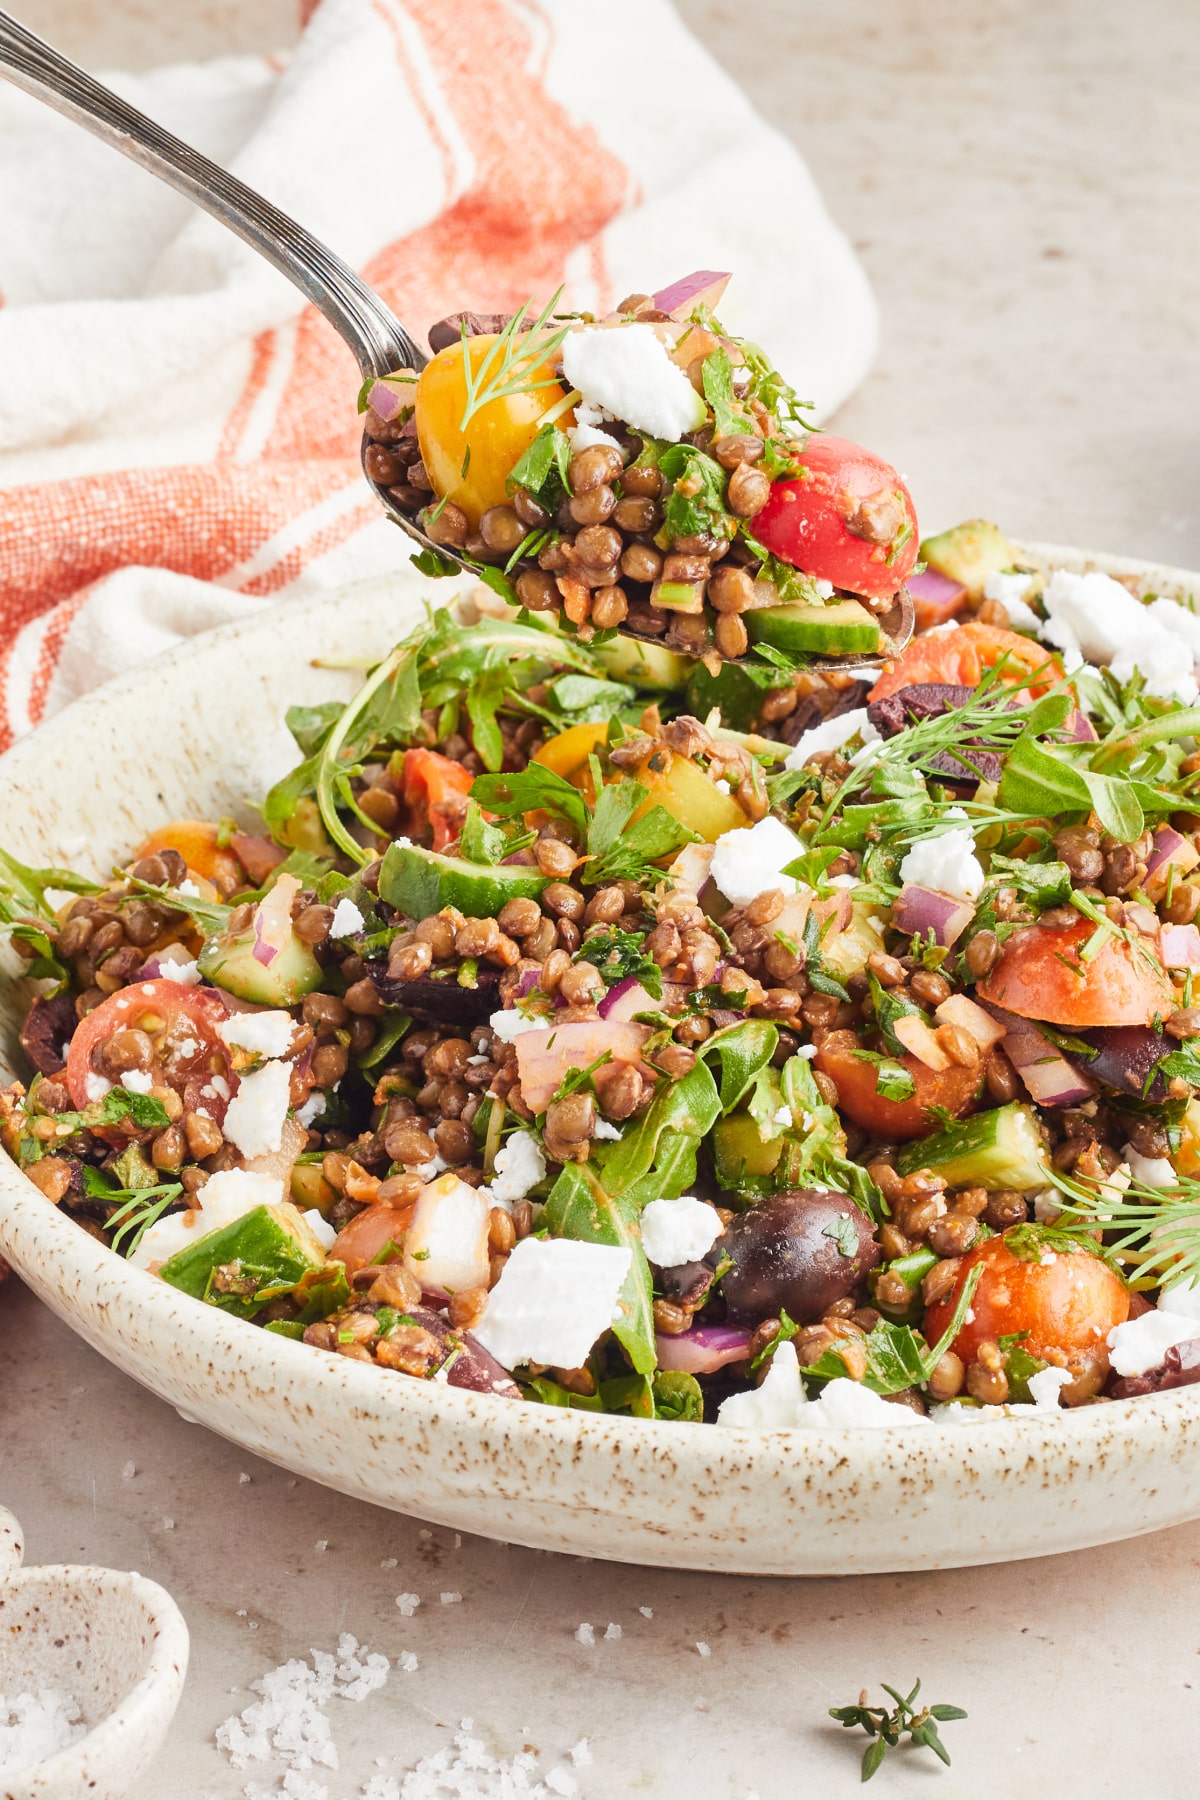 A spoon of salad hovers over a serving bowl of colorful Greek salad with lentils, sliced cherry tomatoes, sliced cucumber, fresh herbs, dairy free feta cheese. A small bowl of bright orange sun dried tomato dressing sits on the side with an orange and white striped cloth napkin.